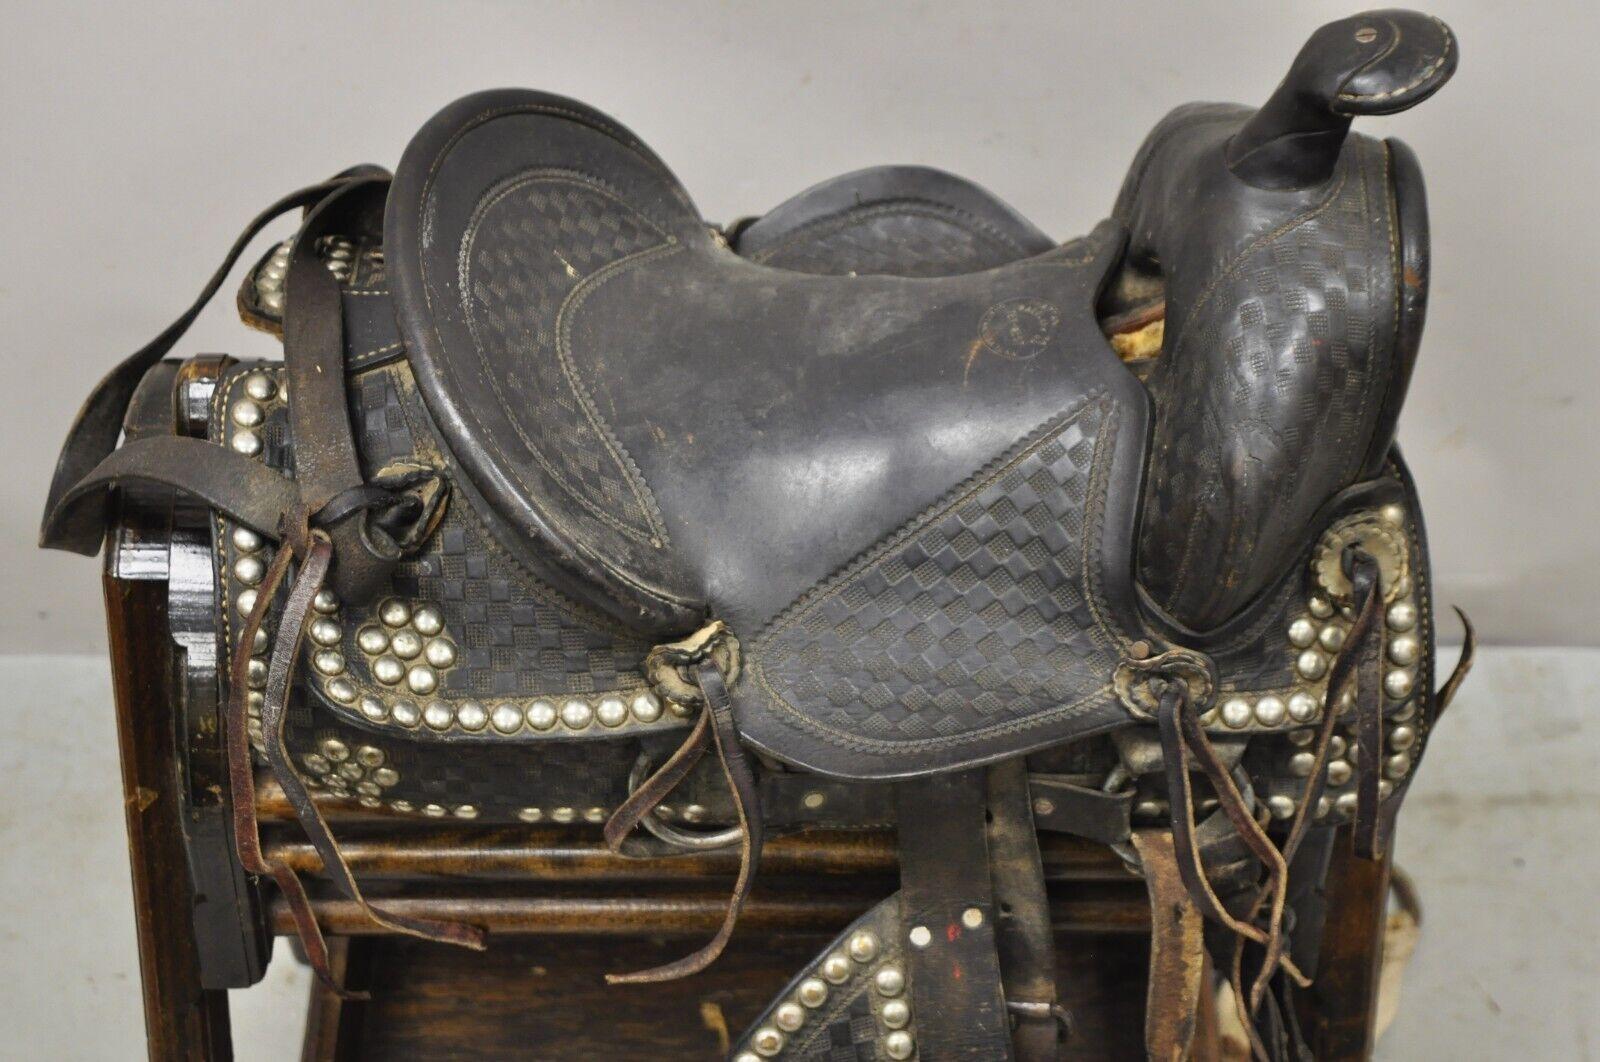 Country Chattanooga Saddlery Co Tex-West Brown Leather Studded Horse Show Saddle 12